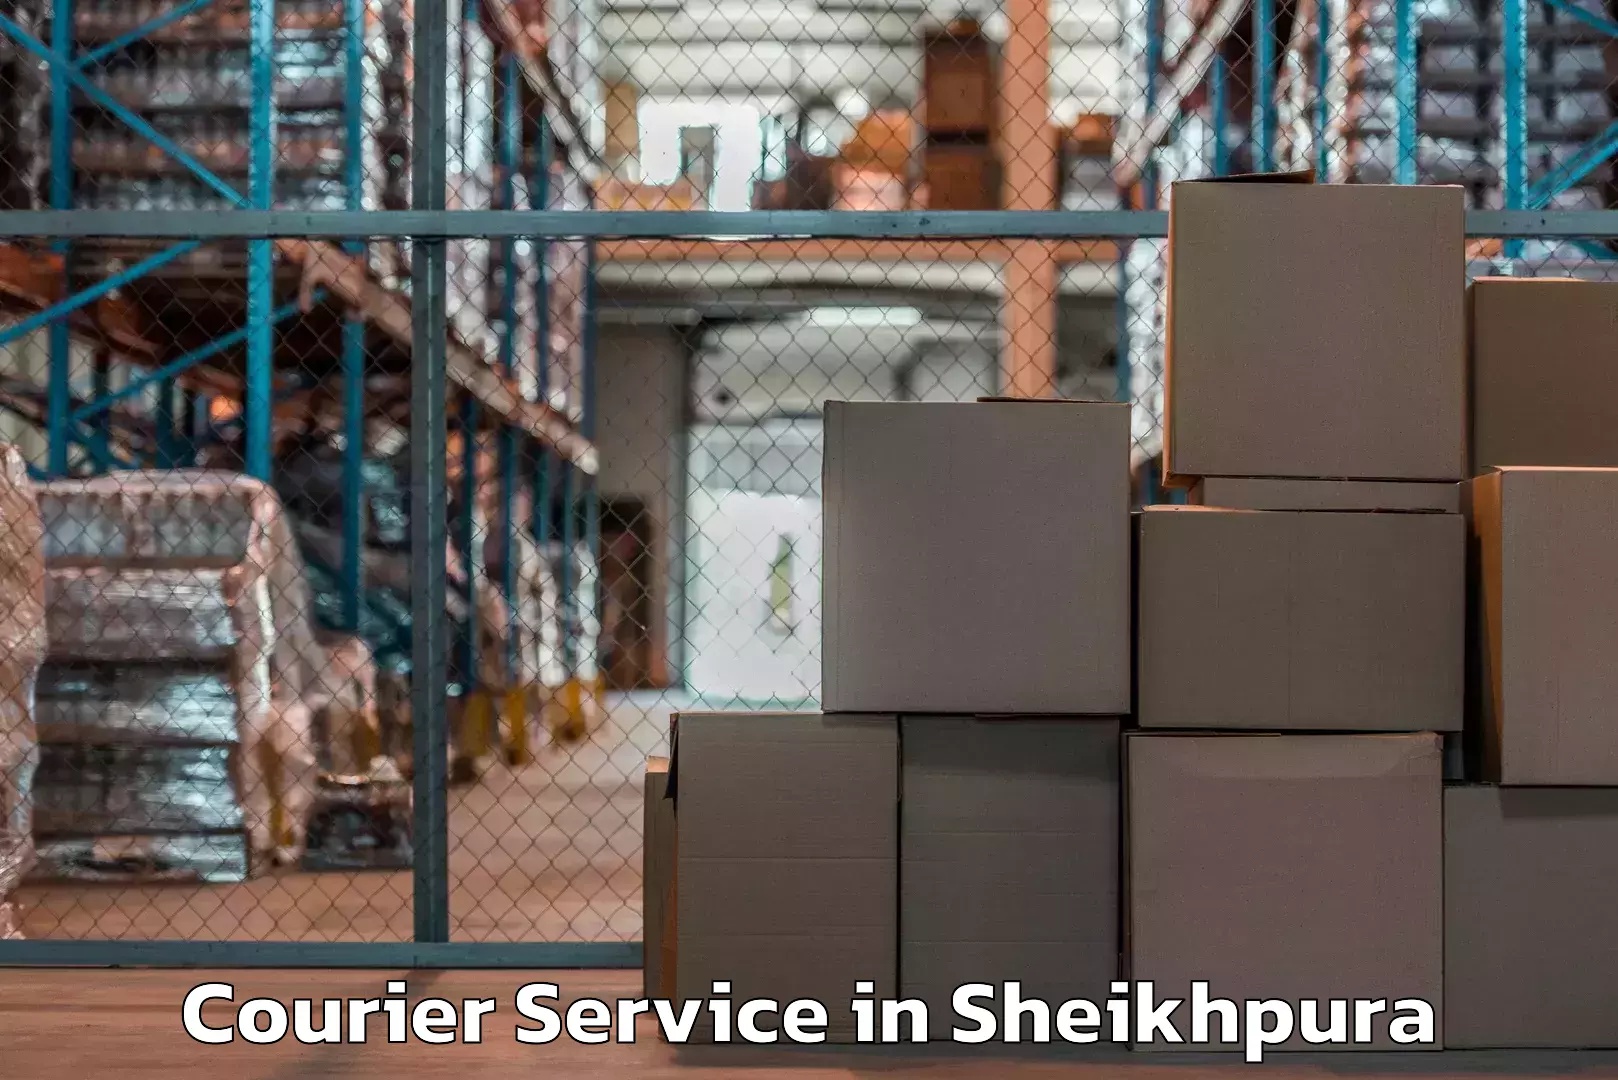 Personalized courier experiences in Sheikhpura